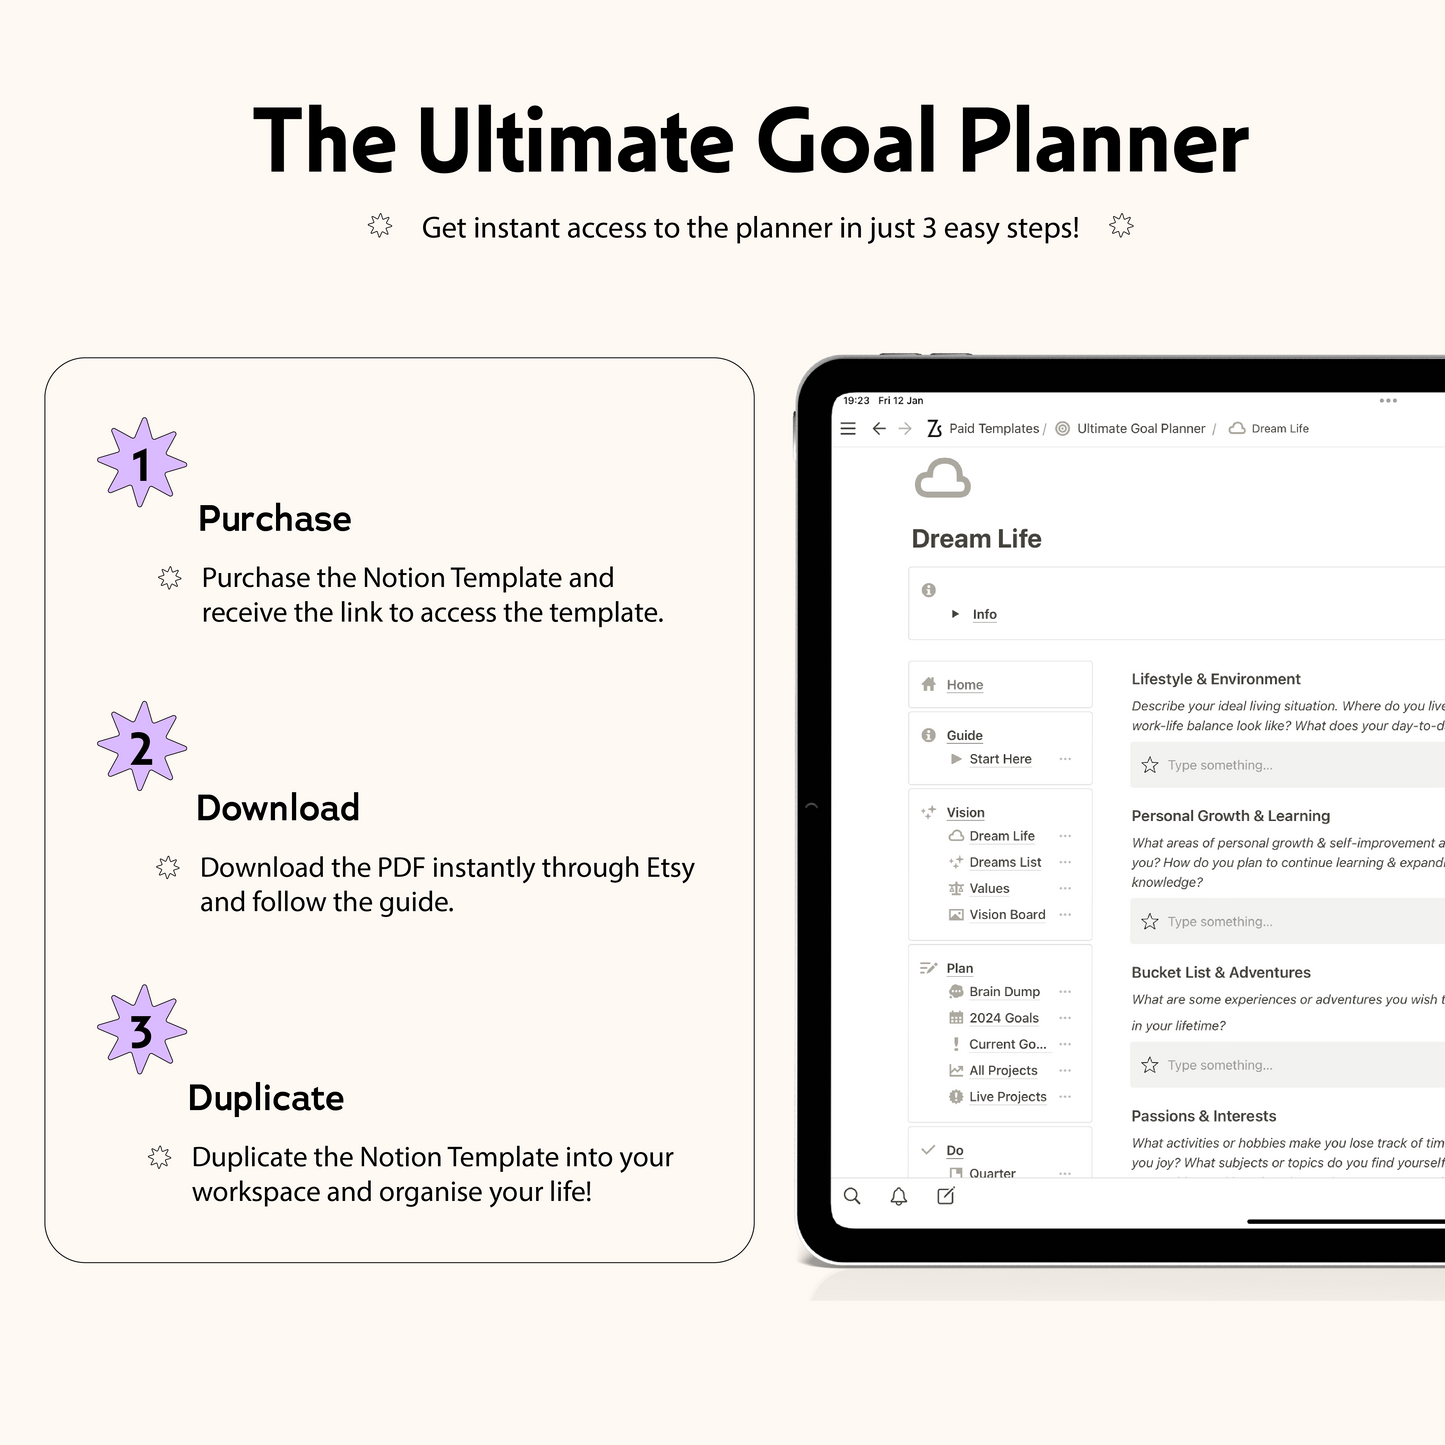 Ultimate Goal Planning Notion Template